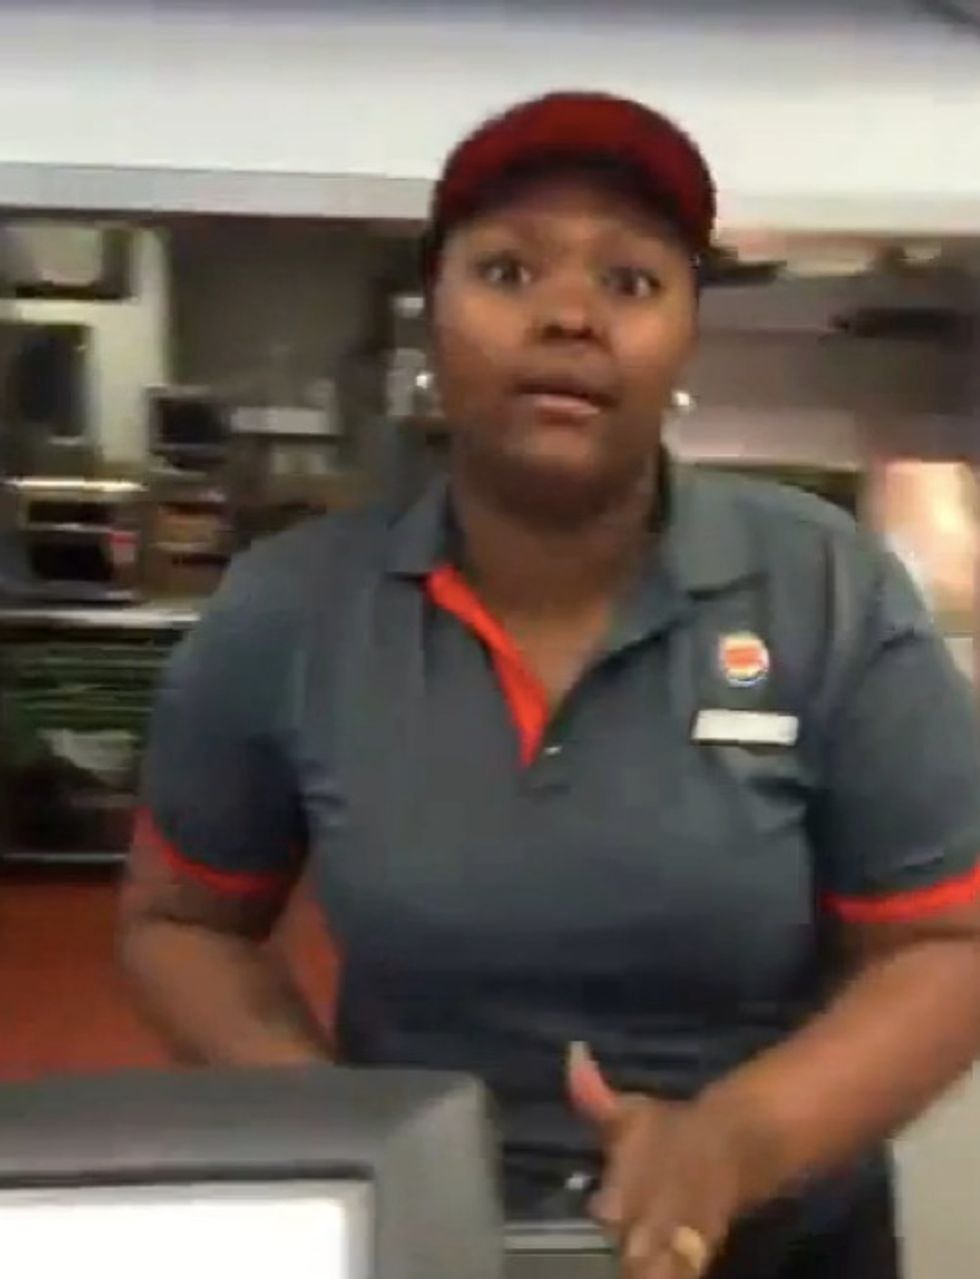 Burger King Employee Absolutely Loses It After She Doesn't Want Customer to 'Have It Her Way